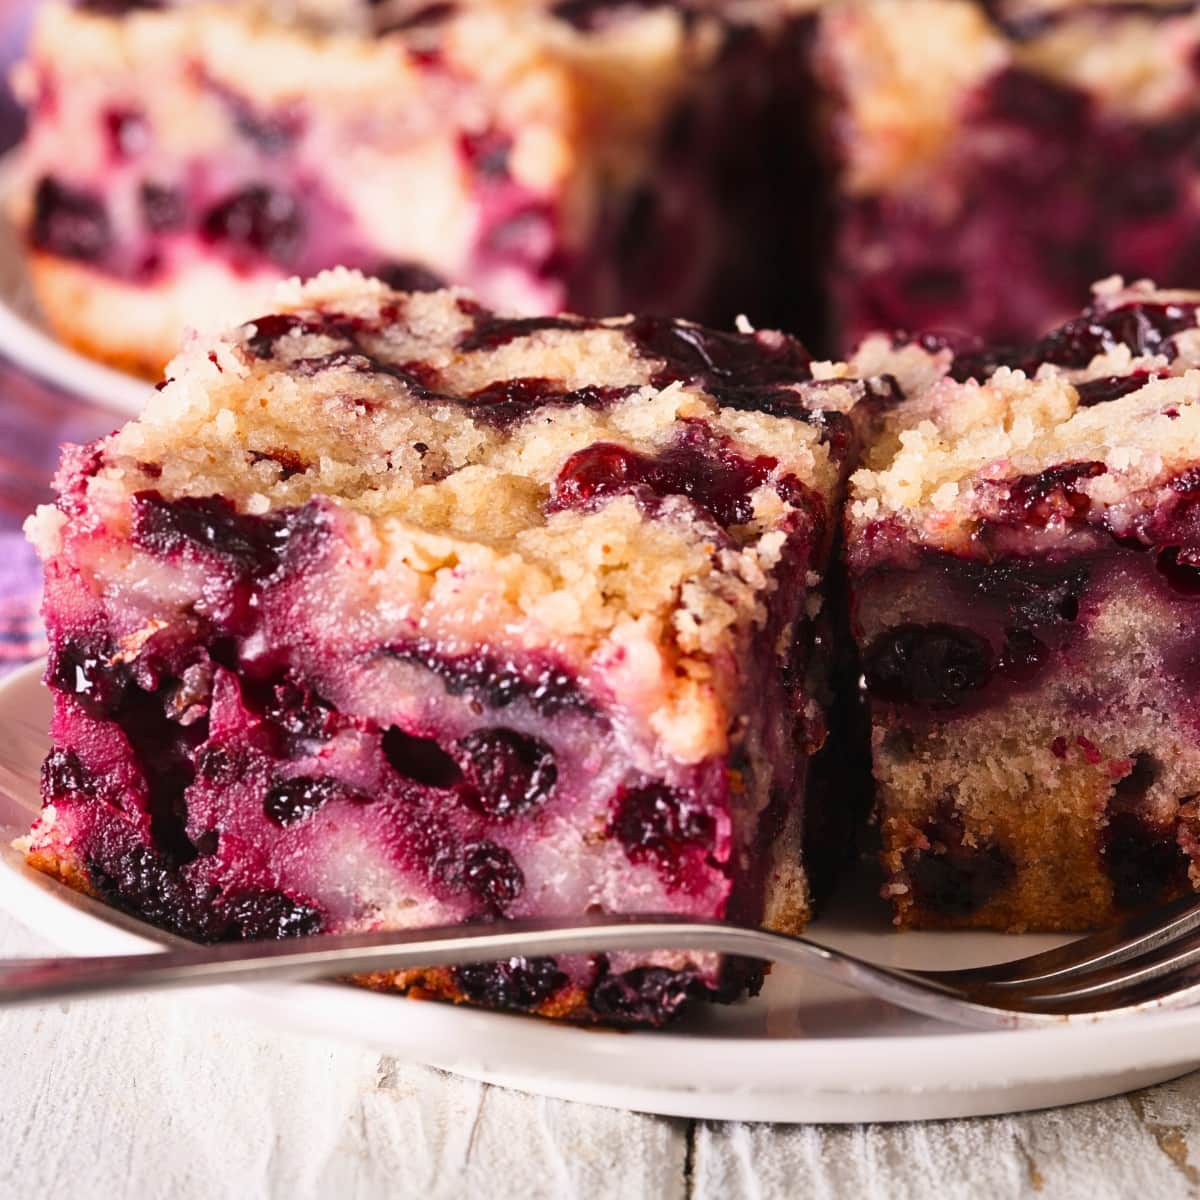 Blueberry Buckle Slices Served on a Plate